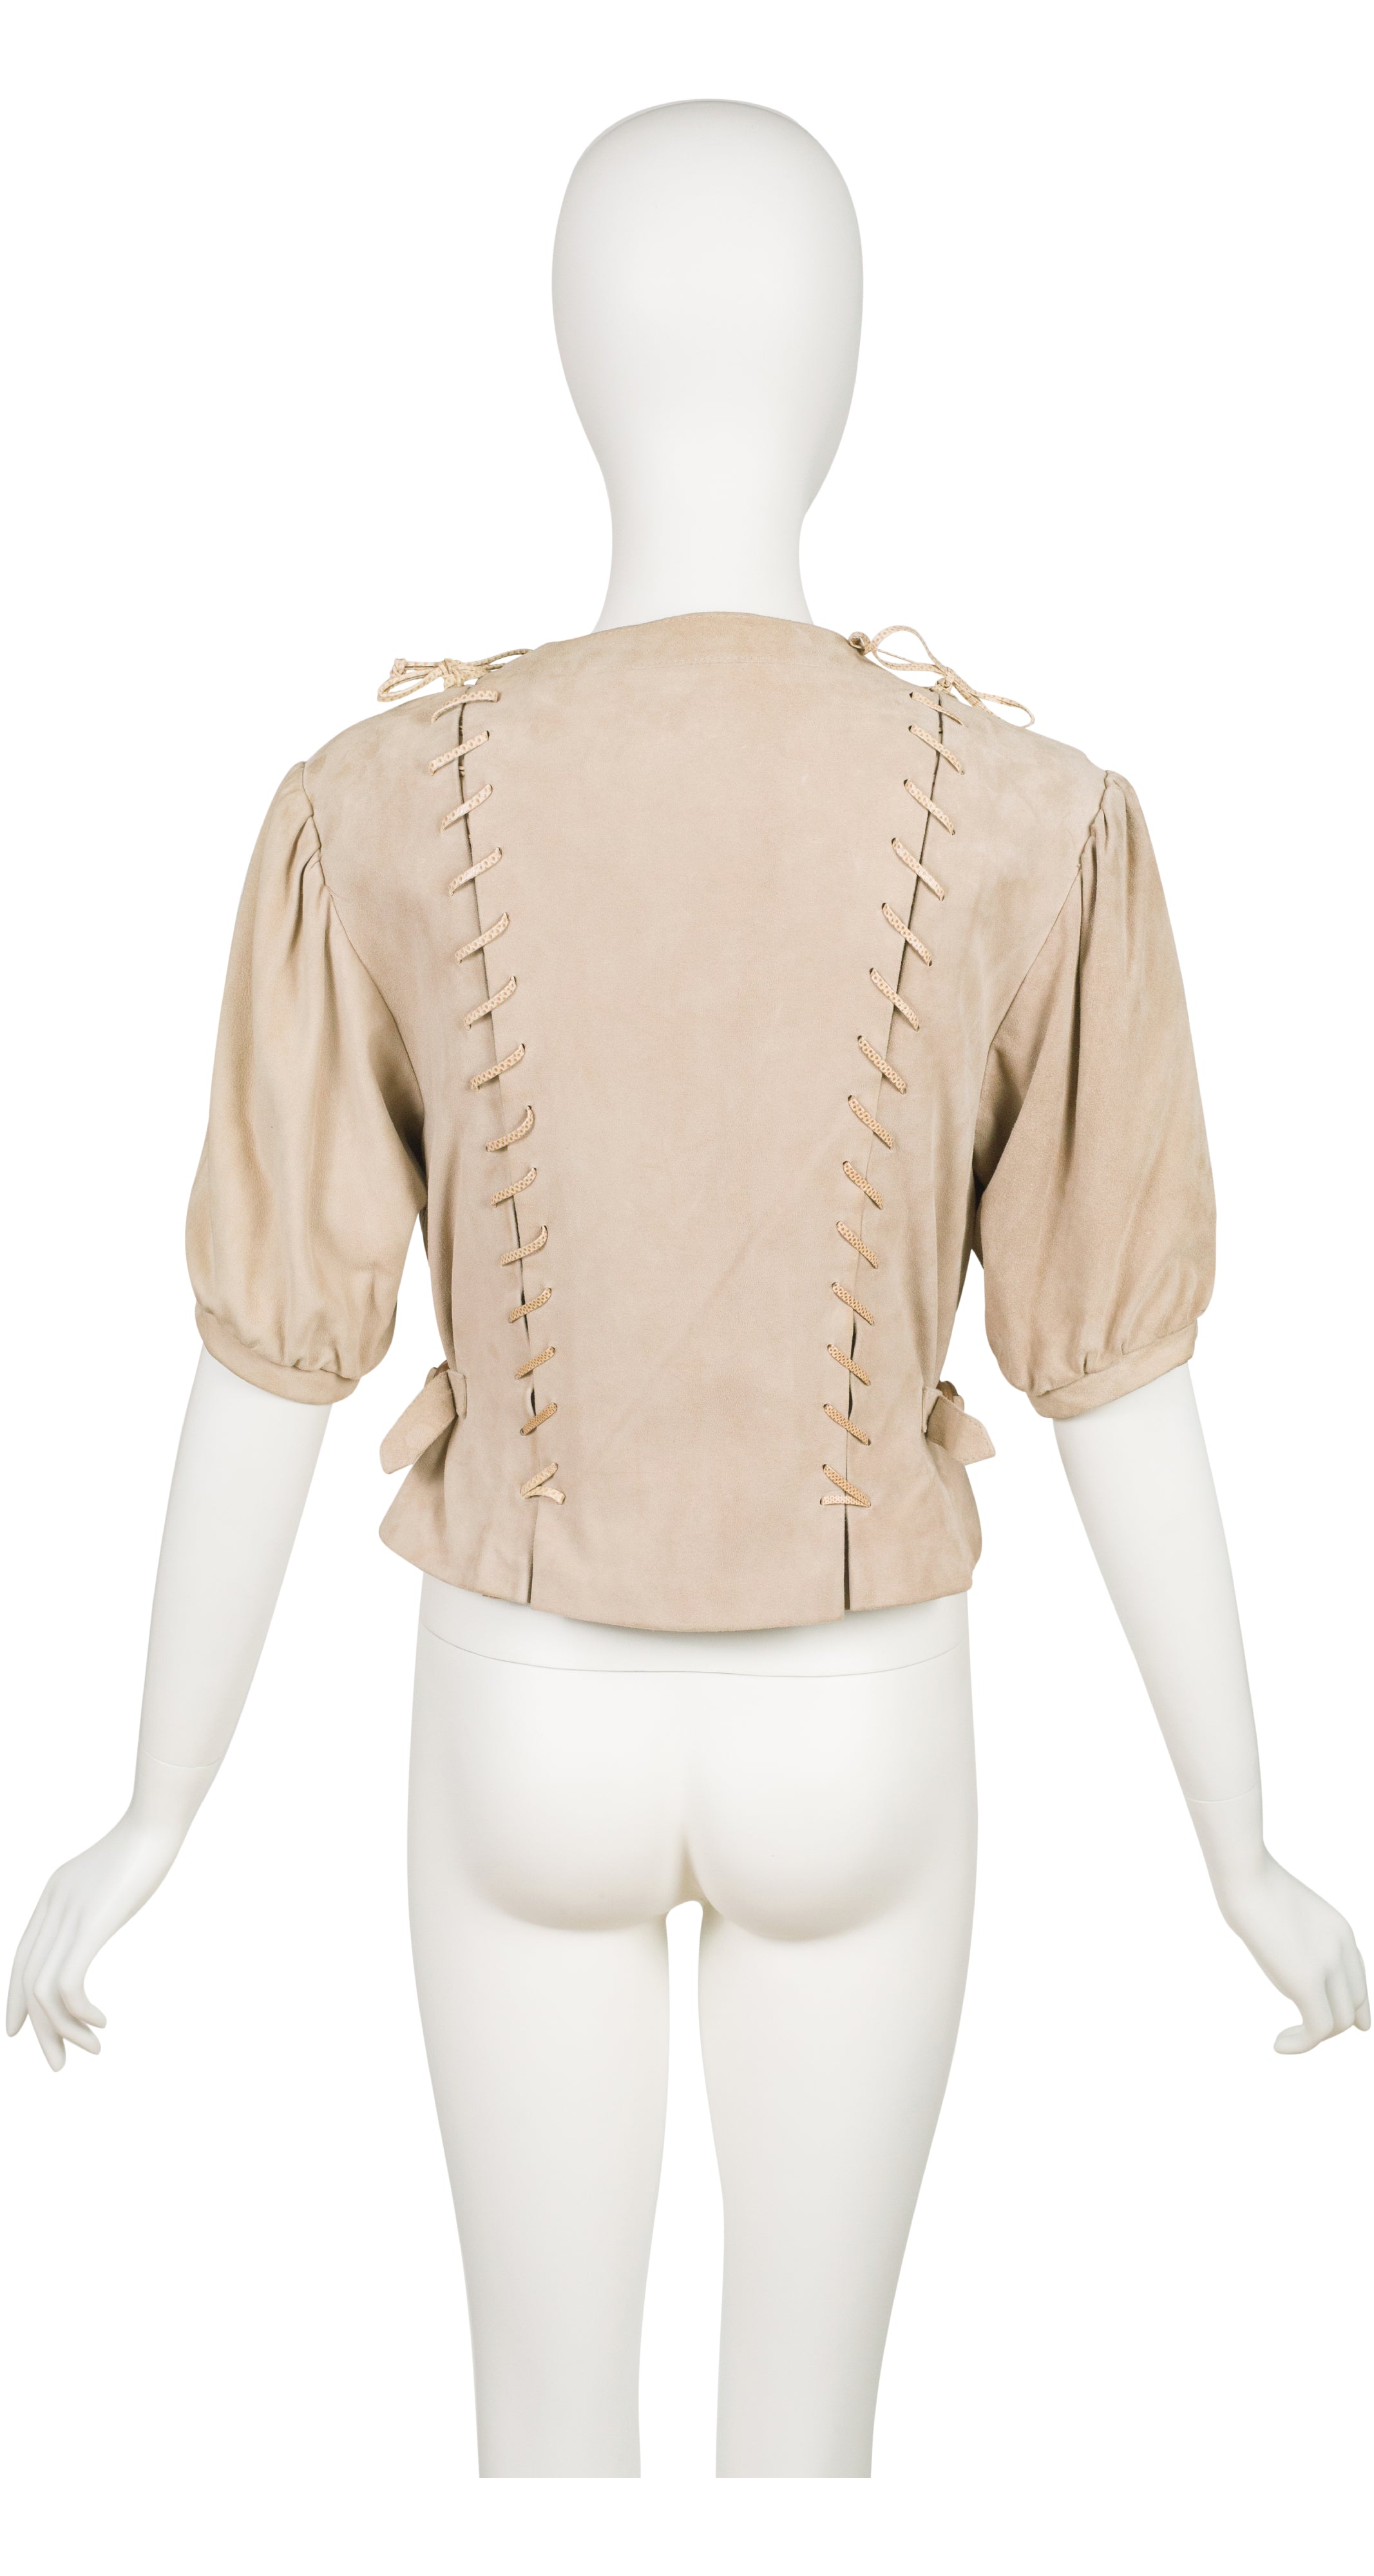 1980s Lace-Up Beige Suede Puff Sleeve Jacket